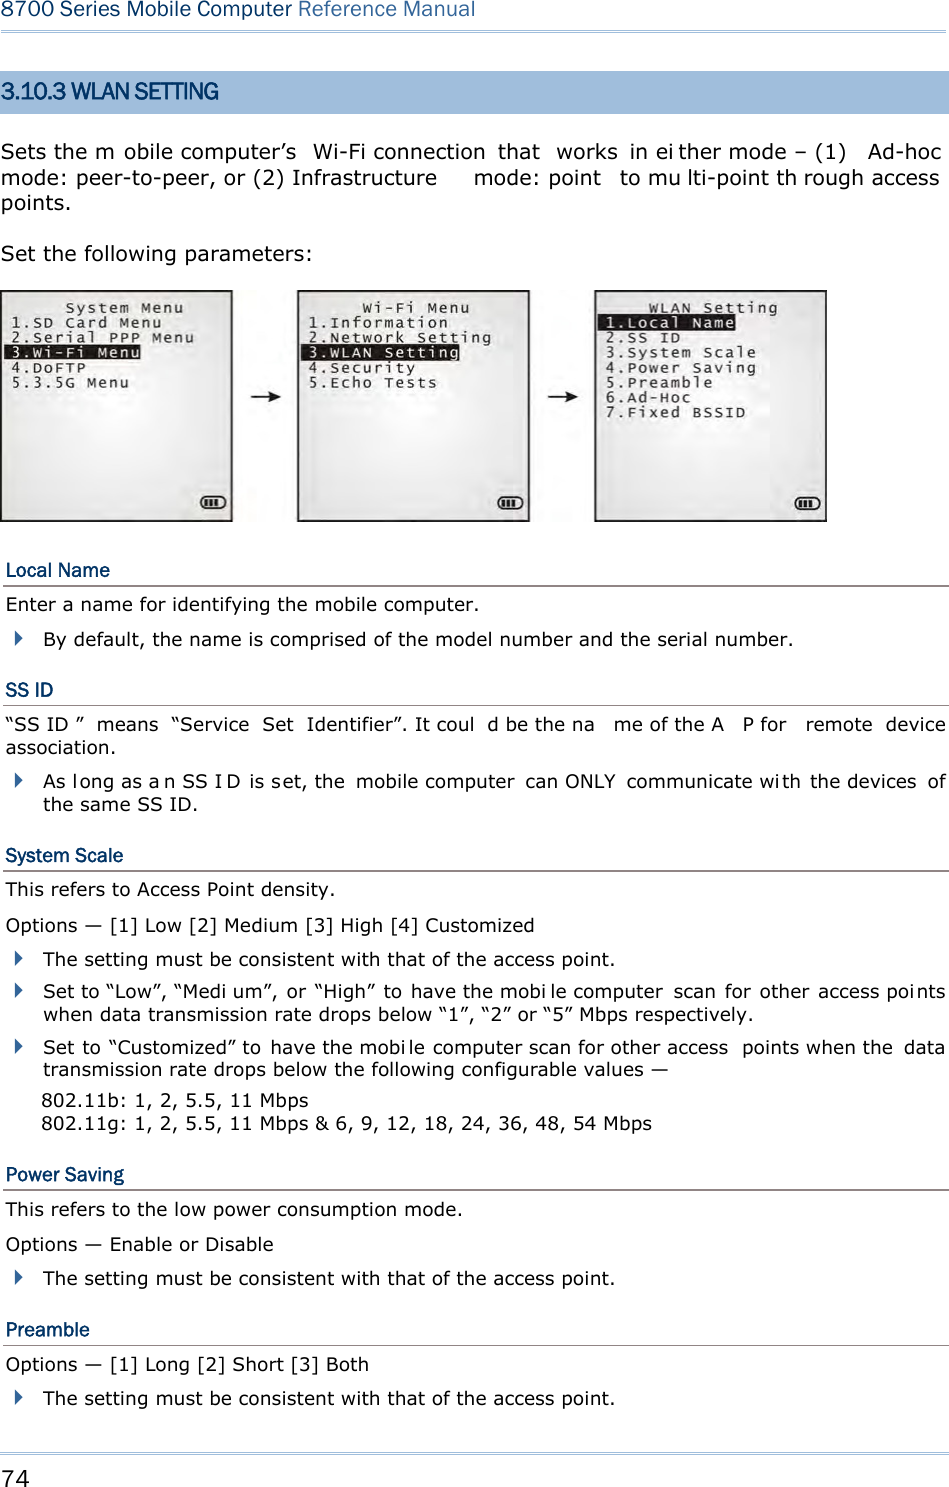 74  8700 Series Mobile Computer Reference Manual  3.10.3 WLAN SETTING Sets the m obile computer’s  Wi-Fi connection  that   works  in ei ther mode – (1)  Ad-hoc mode: peer-to-peer, or (2) Infrastructure  mode: point   to mu lti-point th rough access points. Set the following parameters:  Local Name Enter a name for identifying the mobile computer.  By default, the name is comprised of the model number and the serial number. SS ID “SS ID ”  means  “Service  Set  Identifier”. It coul d be the na me of the A P for  remote  device association.  As long as a n SS I D is set, the  mobile computer  can ONLY  communicate with the devices  of the same SS ID. System Scale This refers to Access Point density. Options — [1] Low [2] Medium [3] High [4] Customized  The setting must be consistent with that of the access point.  Set to “Low”, “Medi um”, or  “High”  to  have the mobi le computer  scan  for  other access points when data transmission rate drops below “1”, “2” or “5” Mbps respectively.  Set to “Customized” to  have the mobi le computer scan for other access  points when the  data transmission rate drops below the following configurable values — 802.11b: 1, 2, 5.5, 11 Mbps 802.11g: 1, 2, 5.5, 11 Mbps &amp; 6, 9, 12, 18, 24, 36, 48, 54 Mbps Power Saving This refers to the low power consumption mode. Options — Enable or Disable  The setting must be consistent with that of the access point. Preamble Options — [1] Long [2] Short [3] Both  The setting must be consistent with that of the access point. 